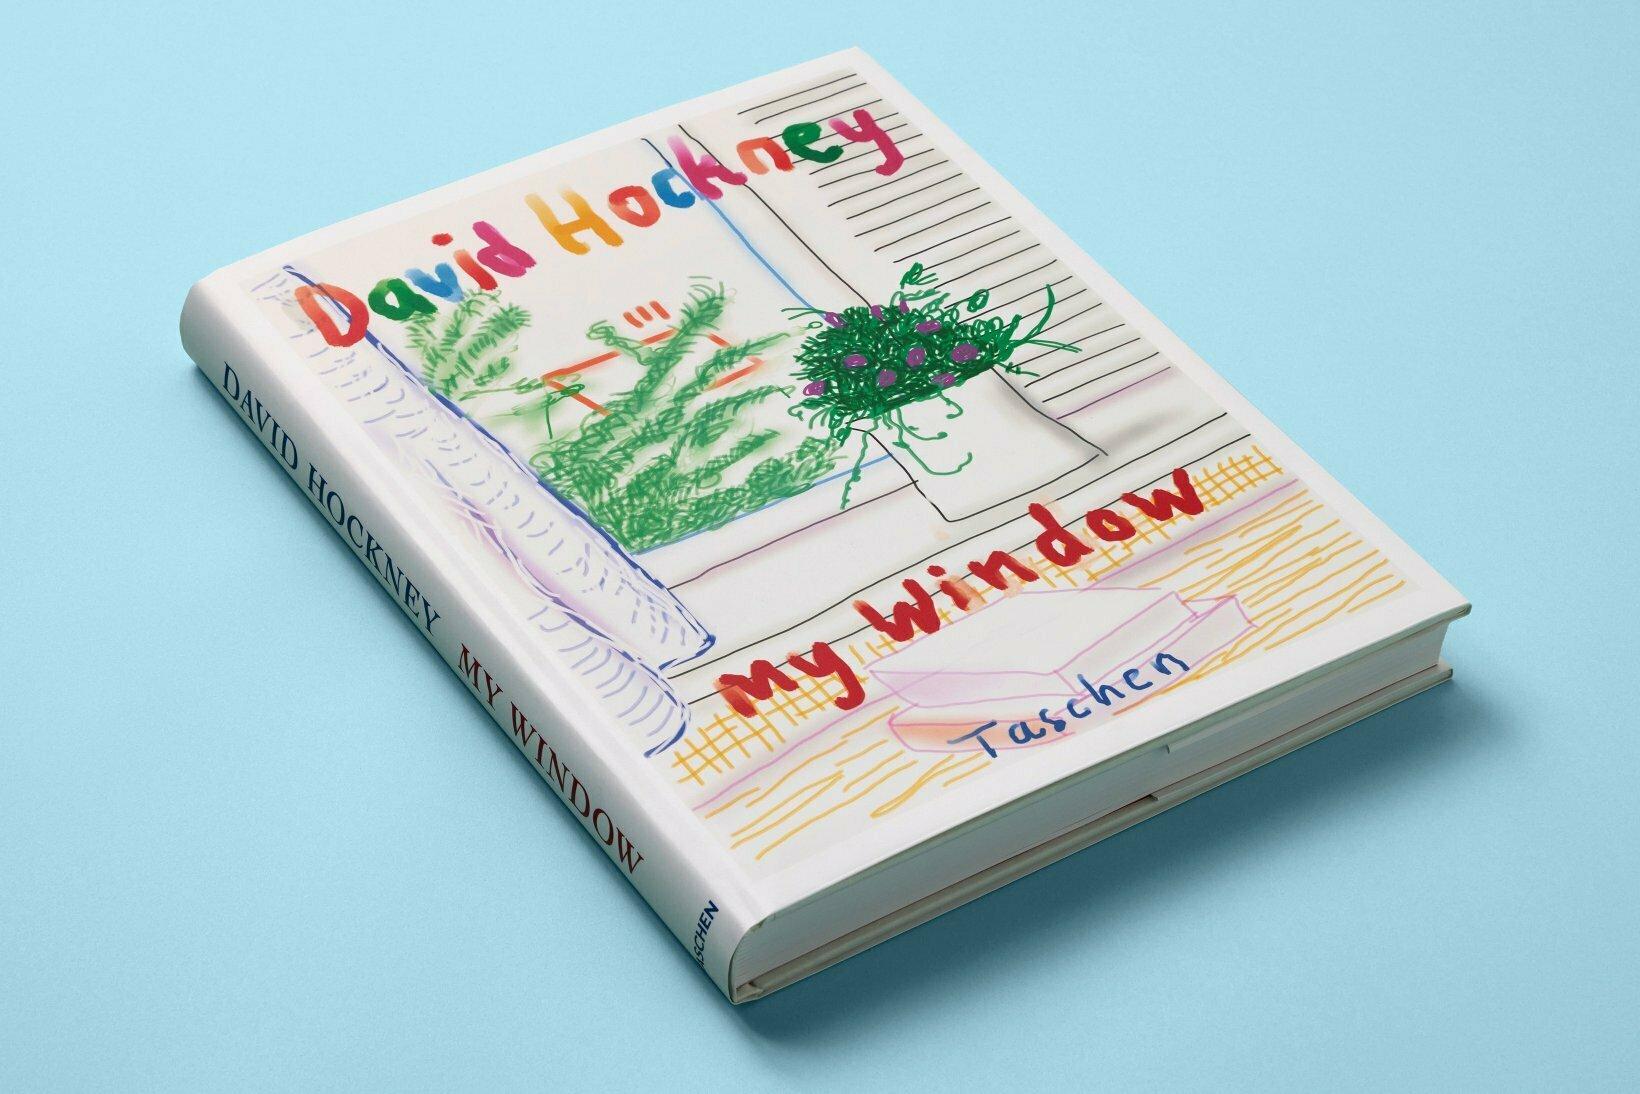 Window to the World.

David Hockney’s artist’s book in an unlimited XL-edition.

When David Hockney discovered the iPhone as an artistic medium, it opened up entirely new possibilities for his art. He made his first digital drawings in spring